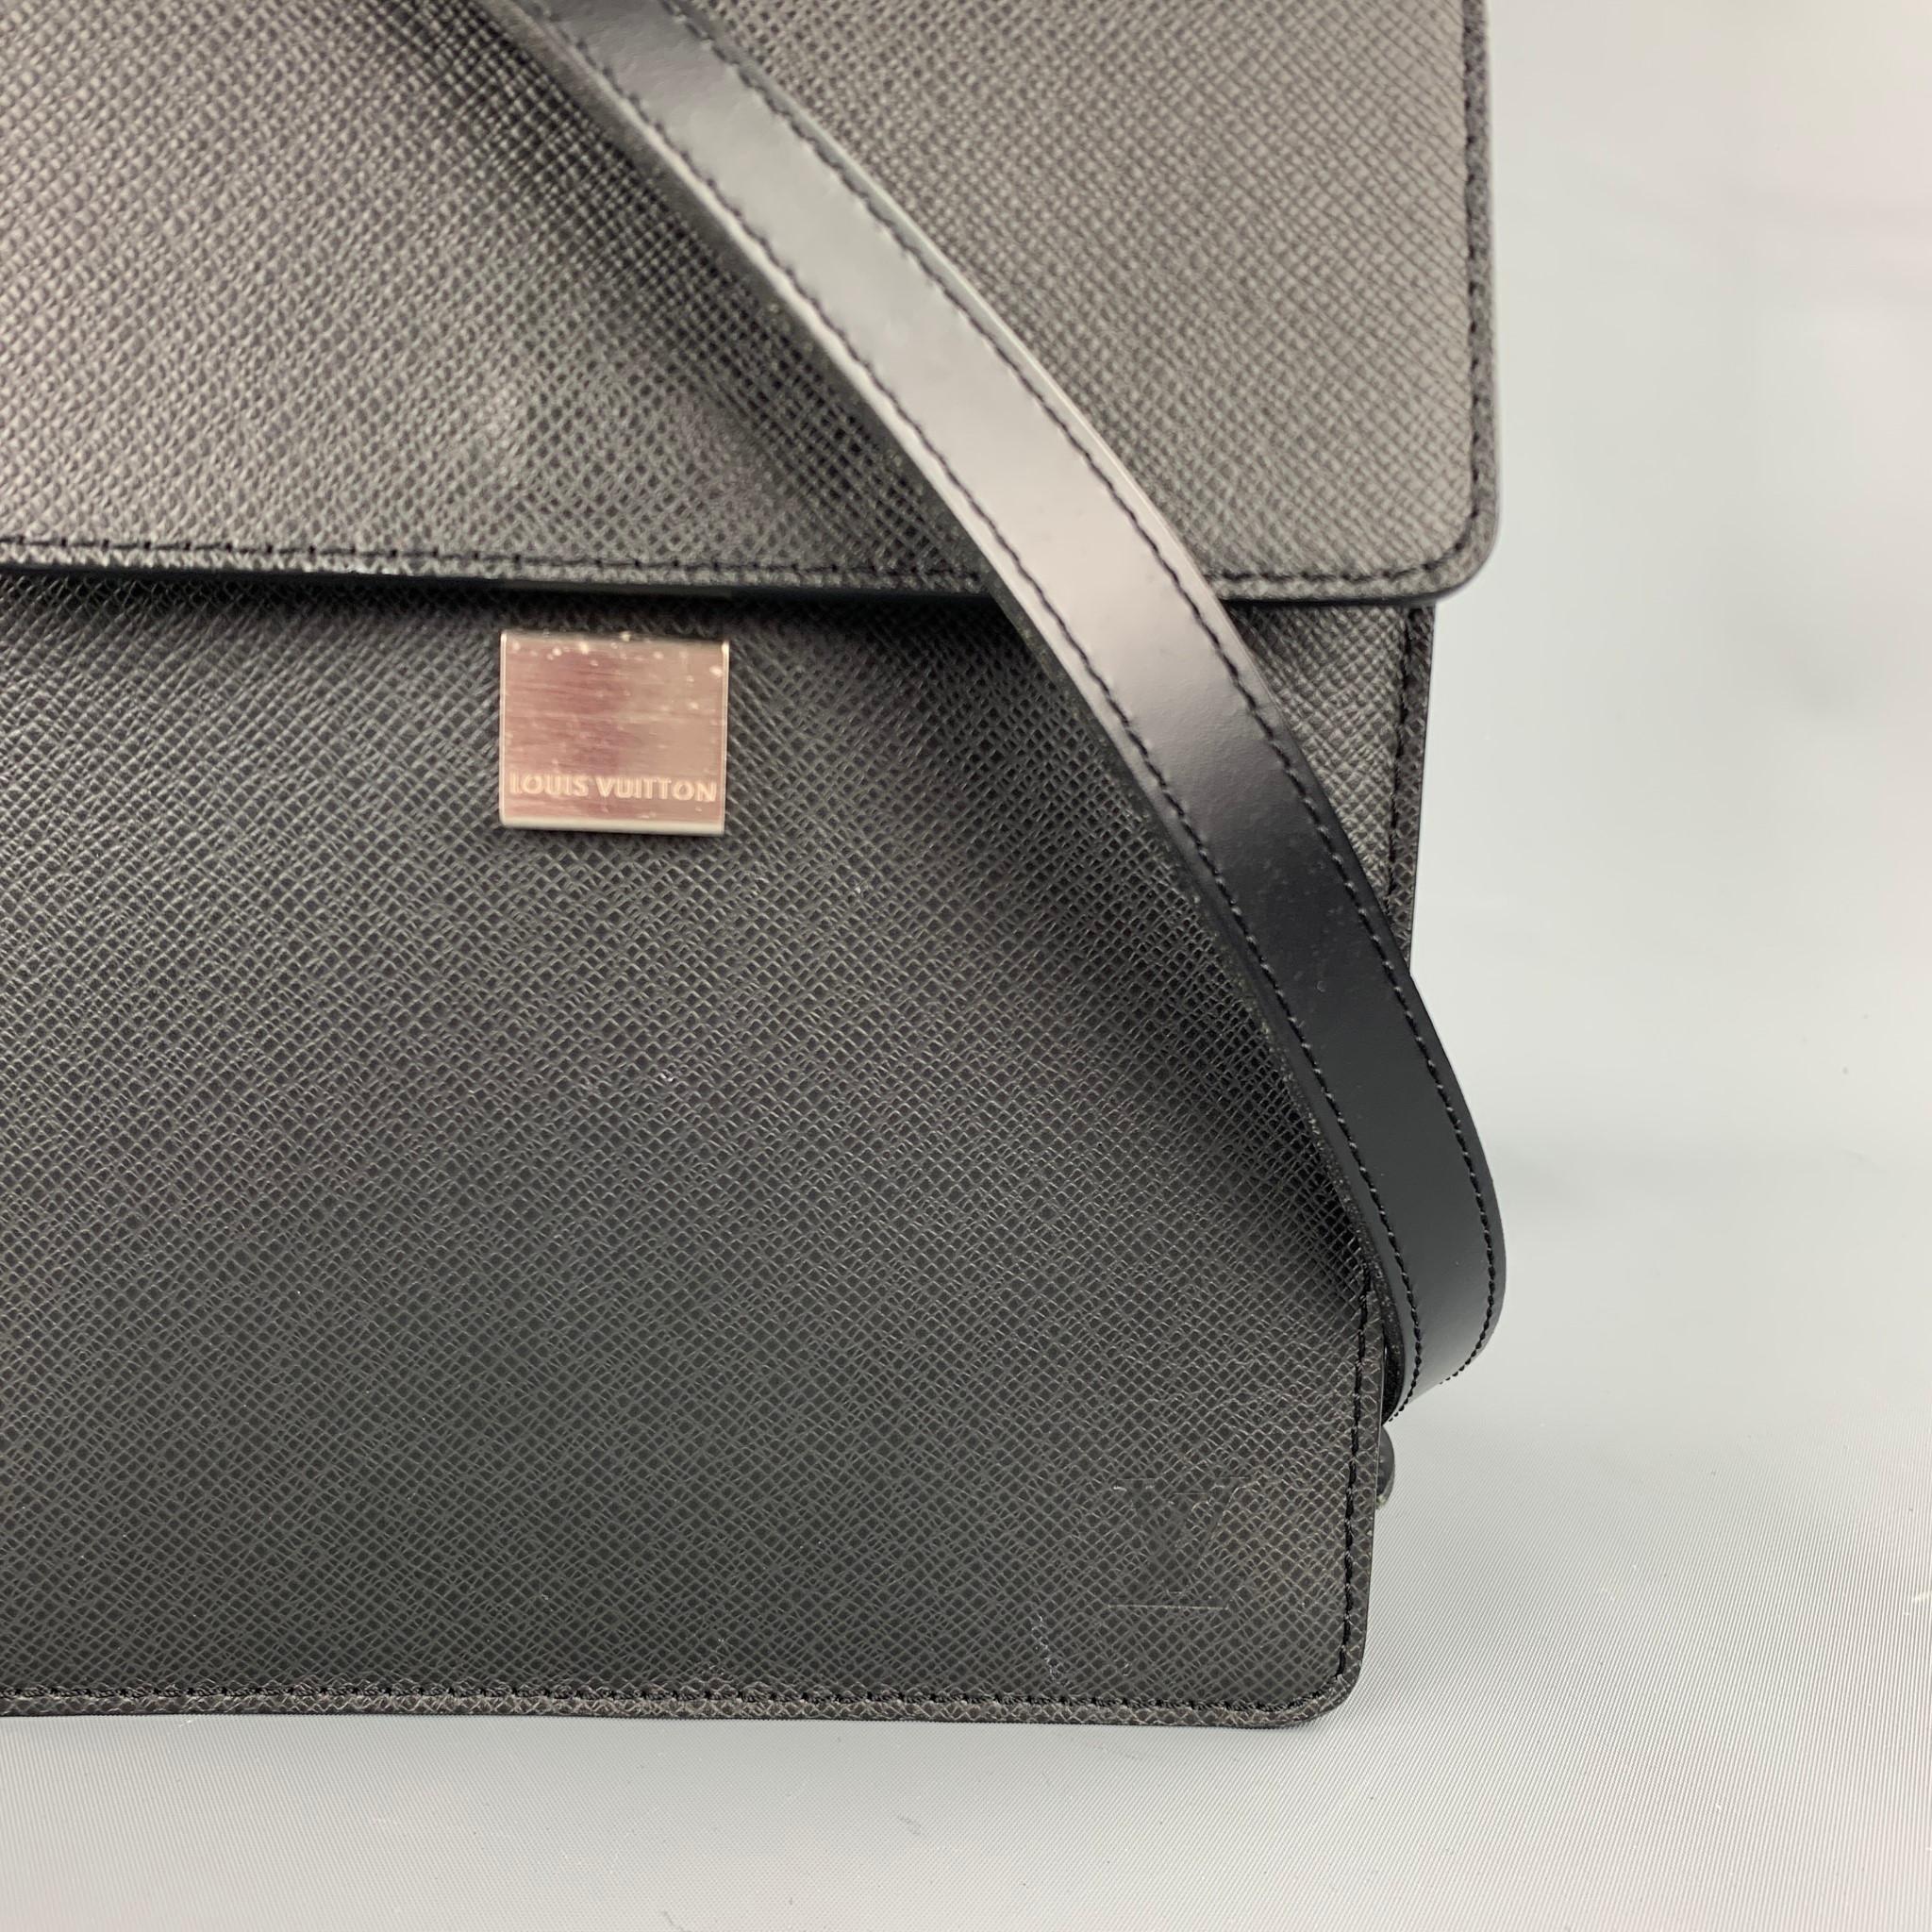 LOUIS VUITTON shoulder bag comes in a black textured taiga leather featuring an adjustable shoulder strap, silver tone hardware, inner pocket, and a clasp closure. Made in France.

Very Good Pre-Owned Condition.
Marked: